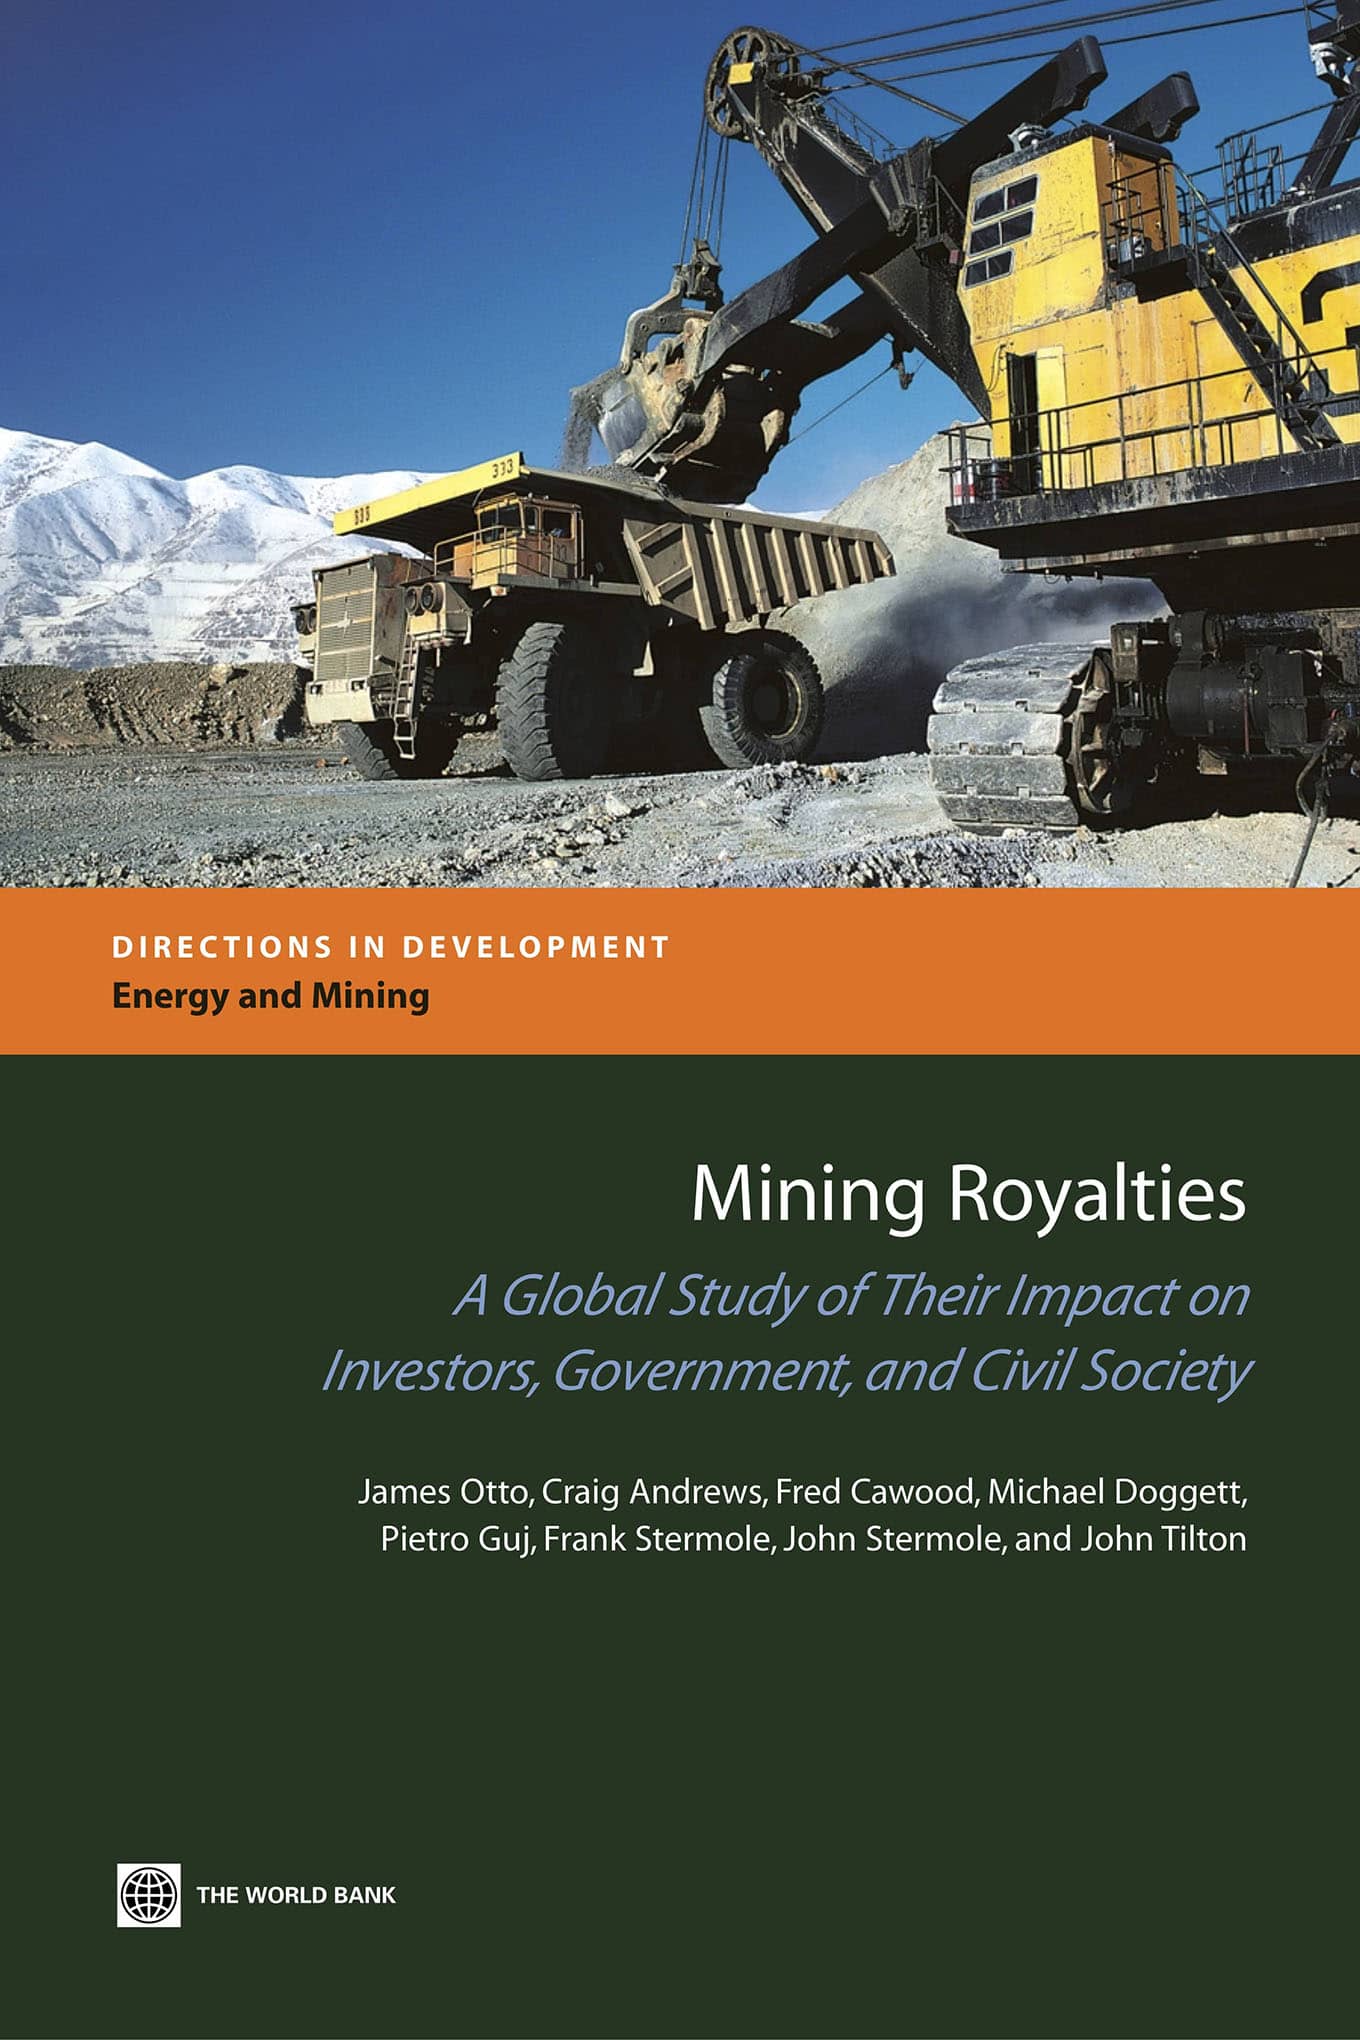 Mining Royalties: A Global Study of their Impact on Investors, Government, and Civil Society (The World Bank, 2006)